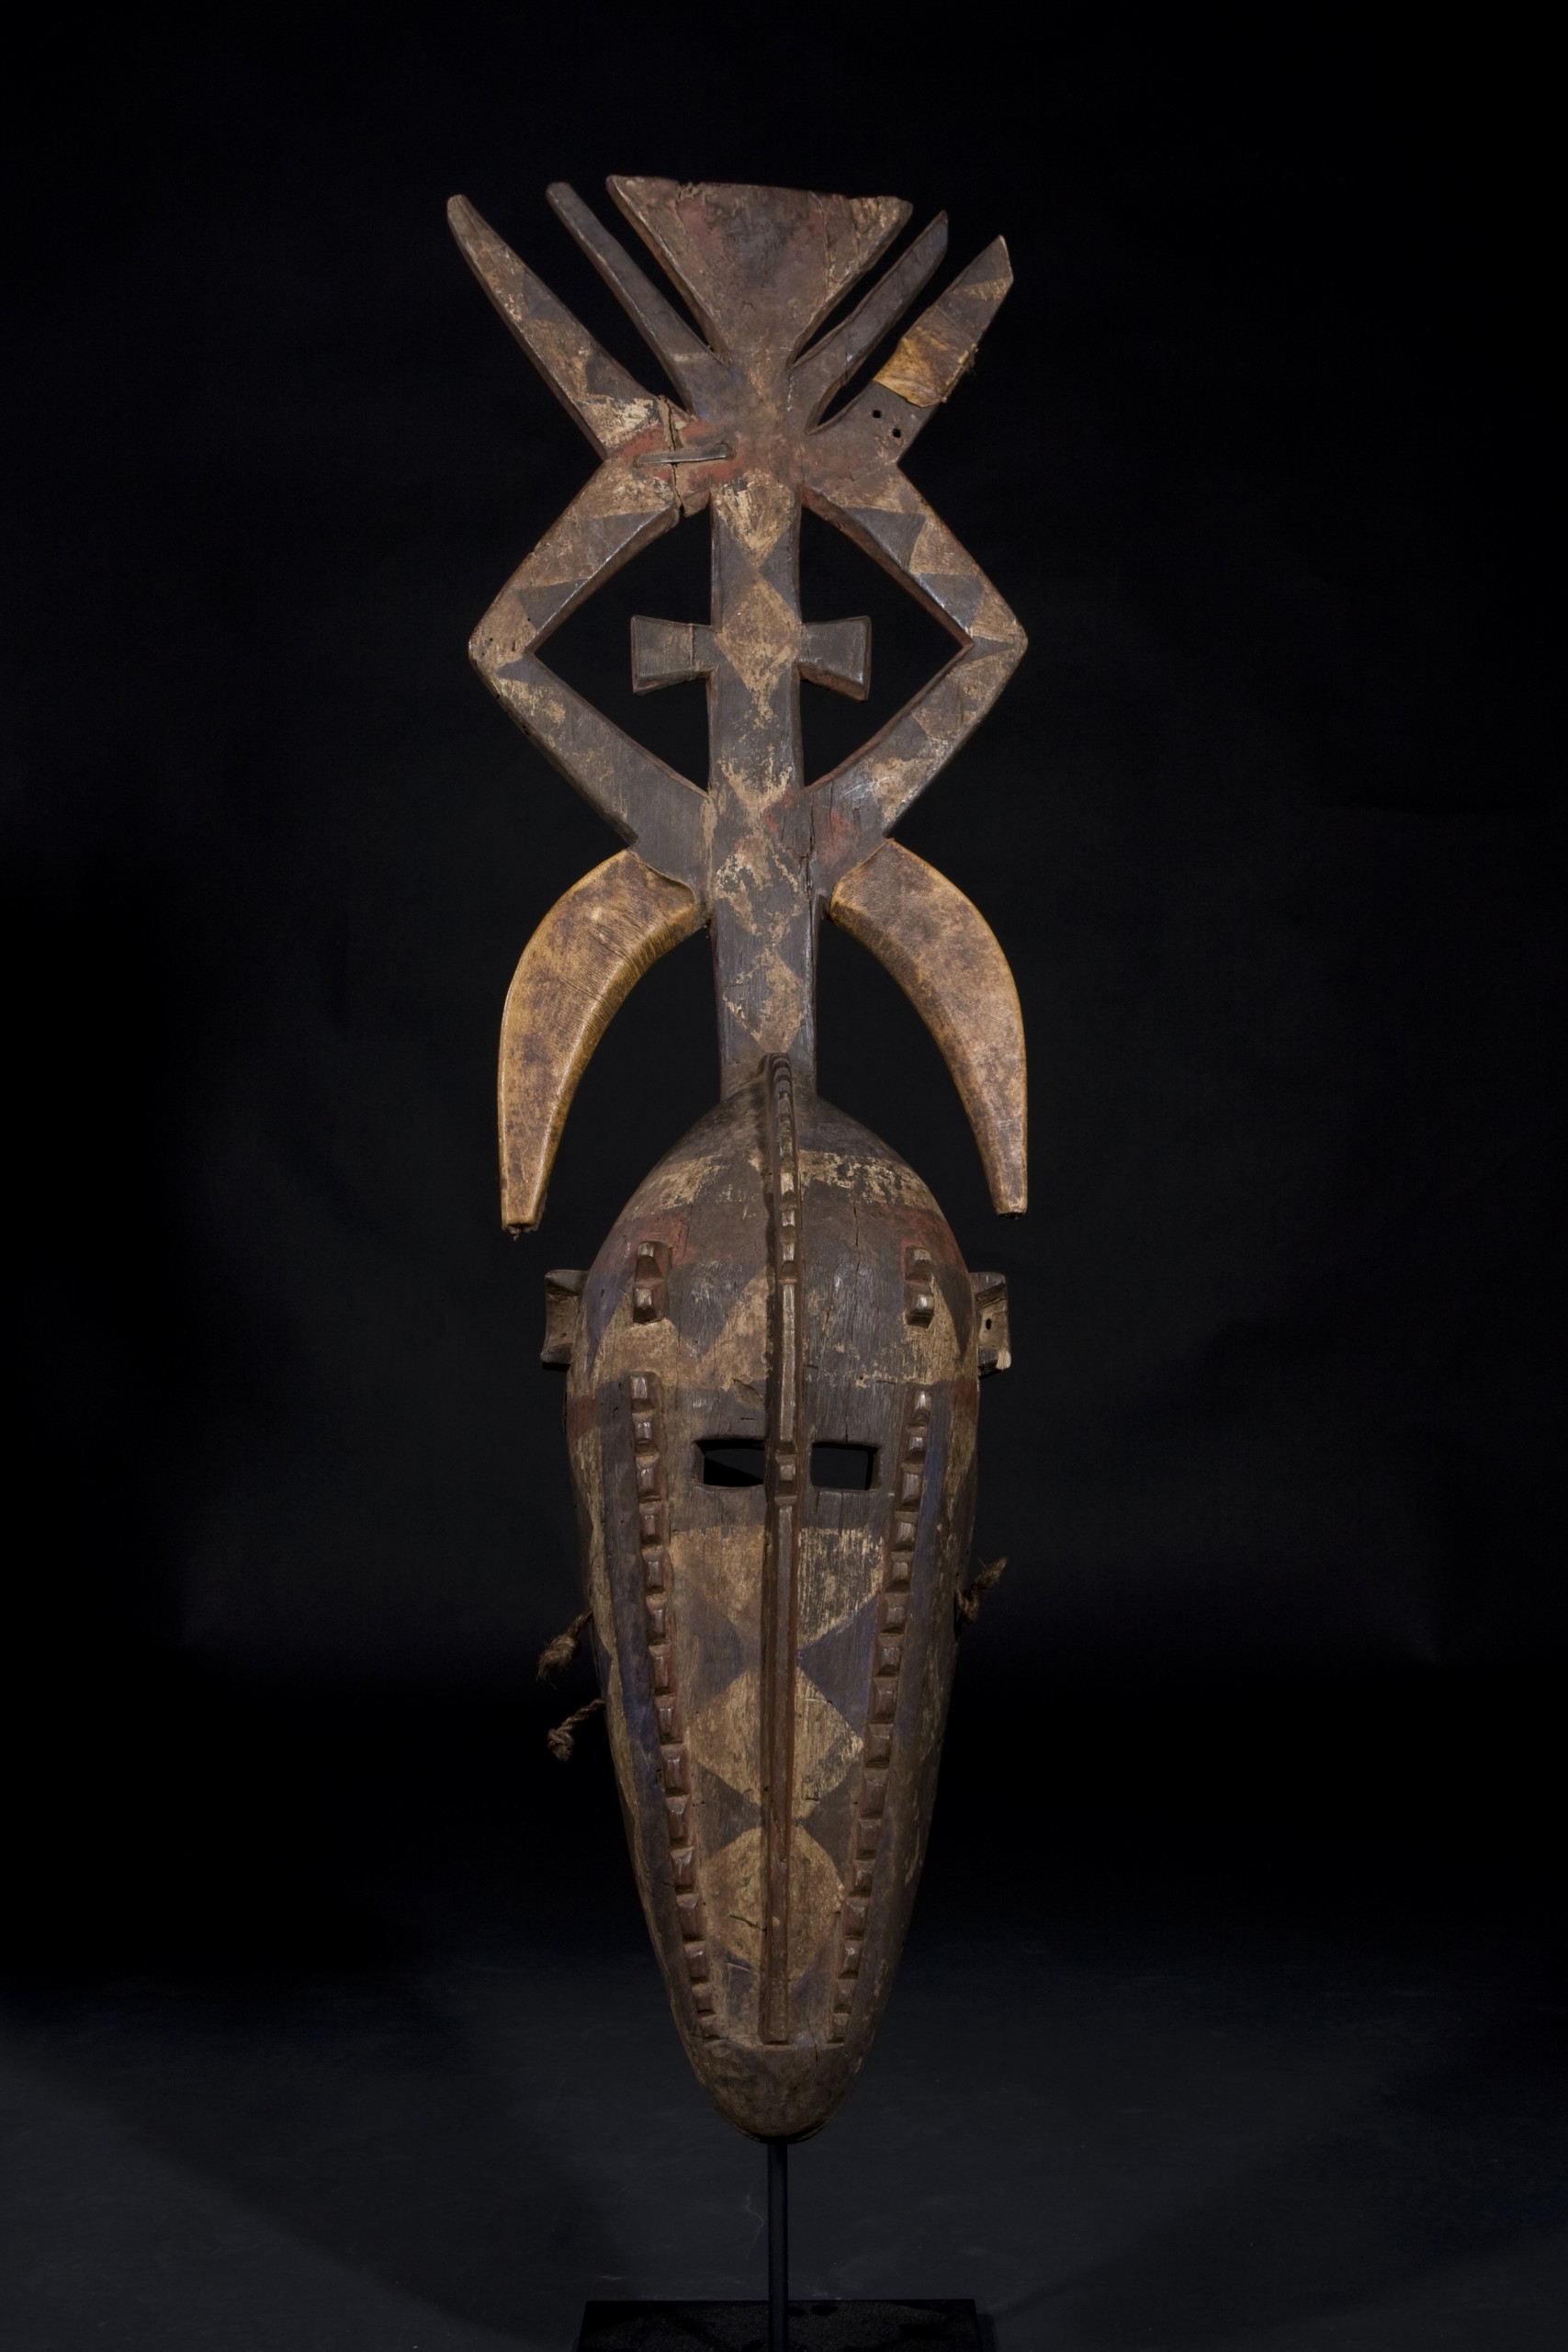 Donated African Art at PLU mossi-mask